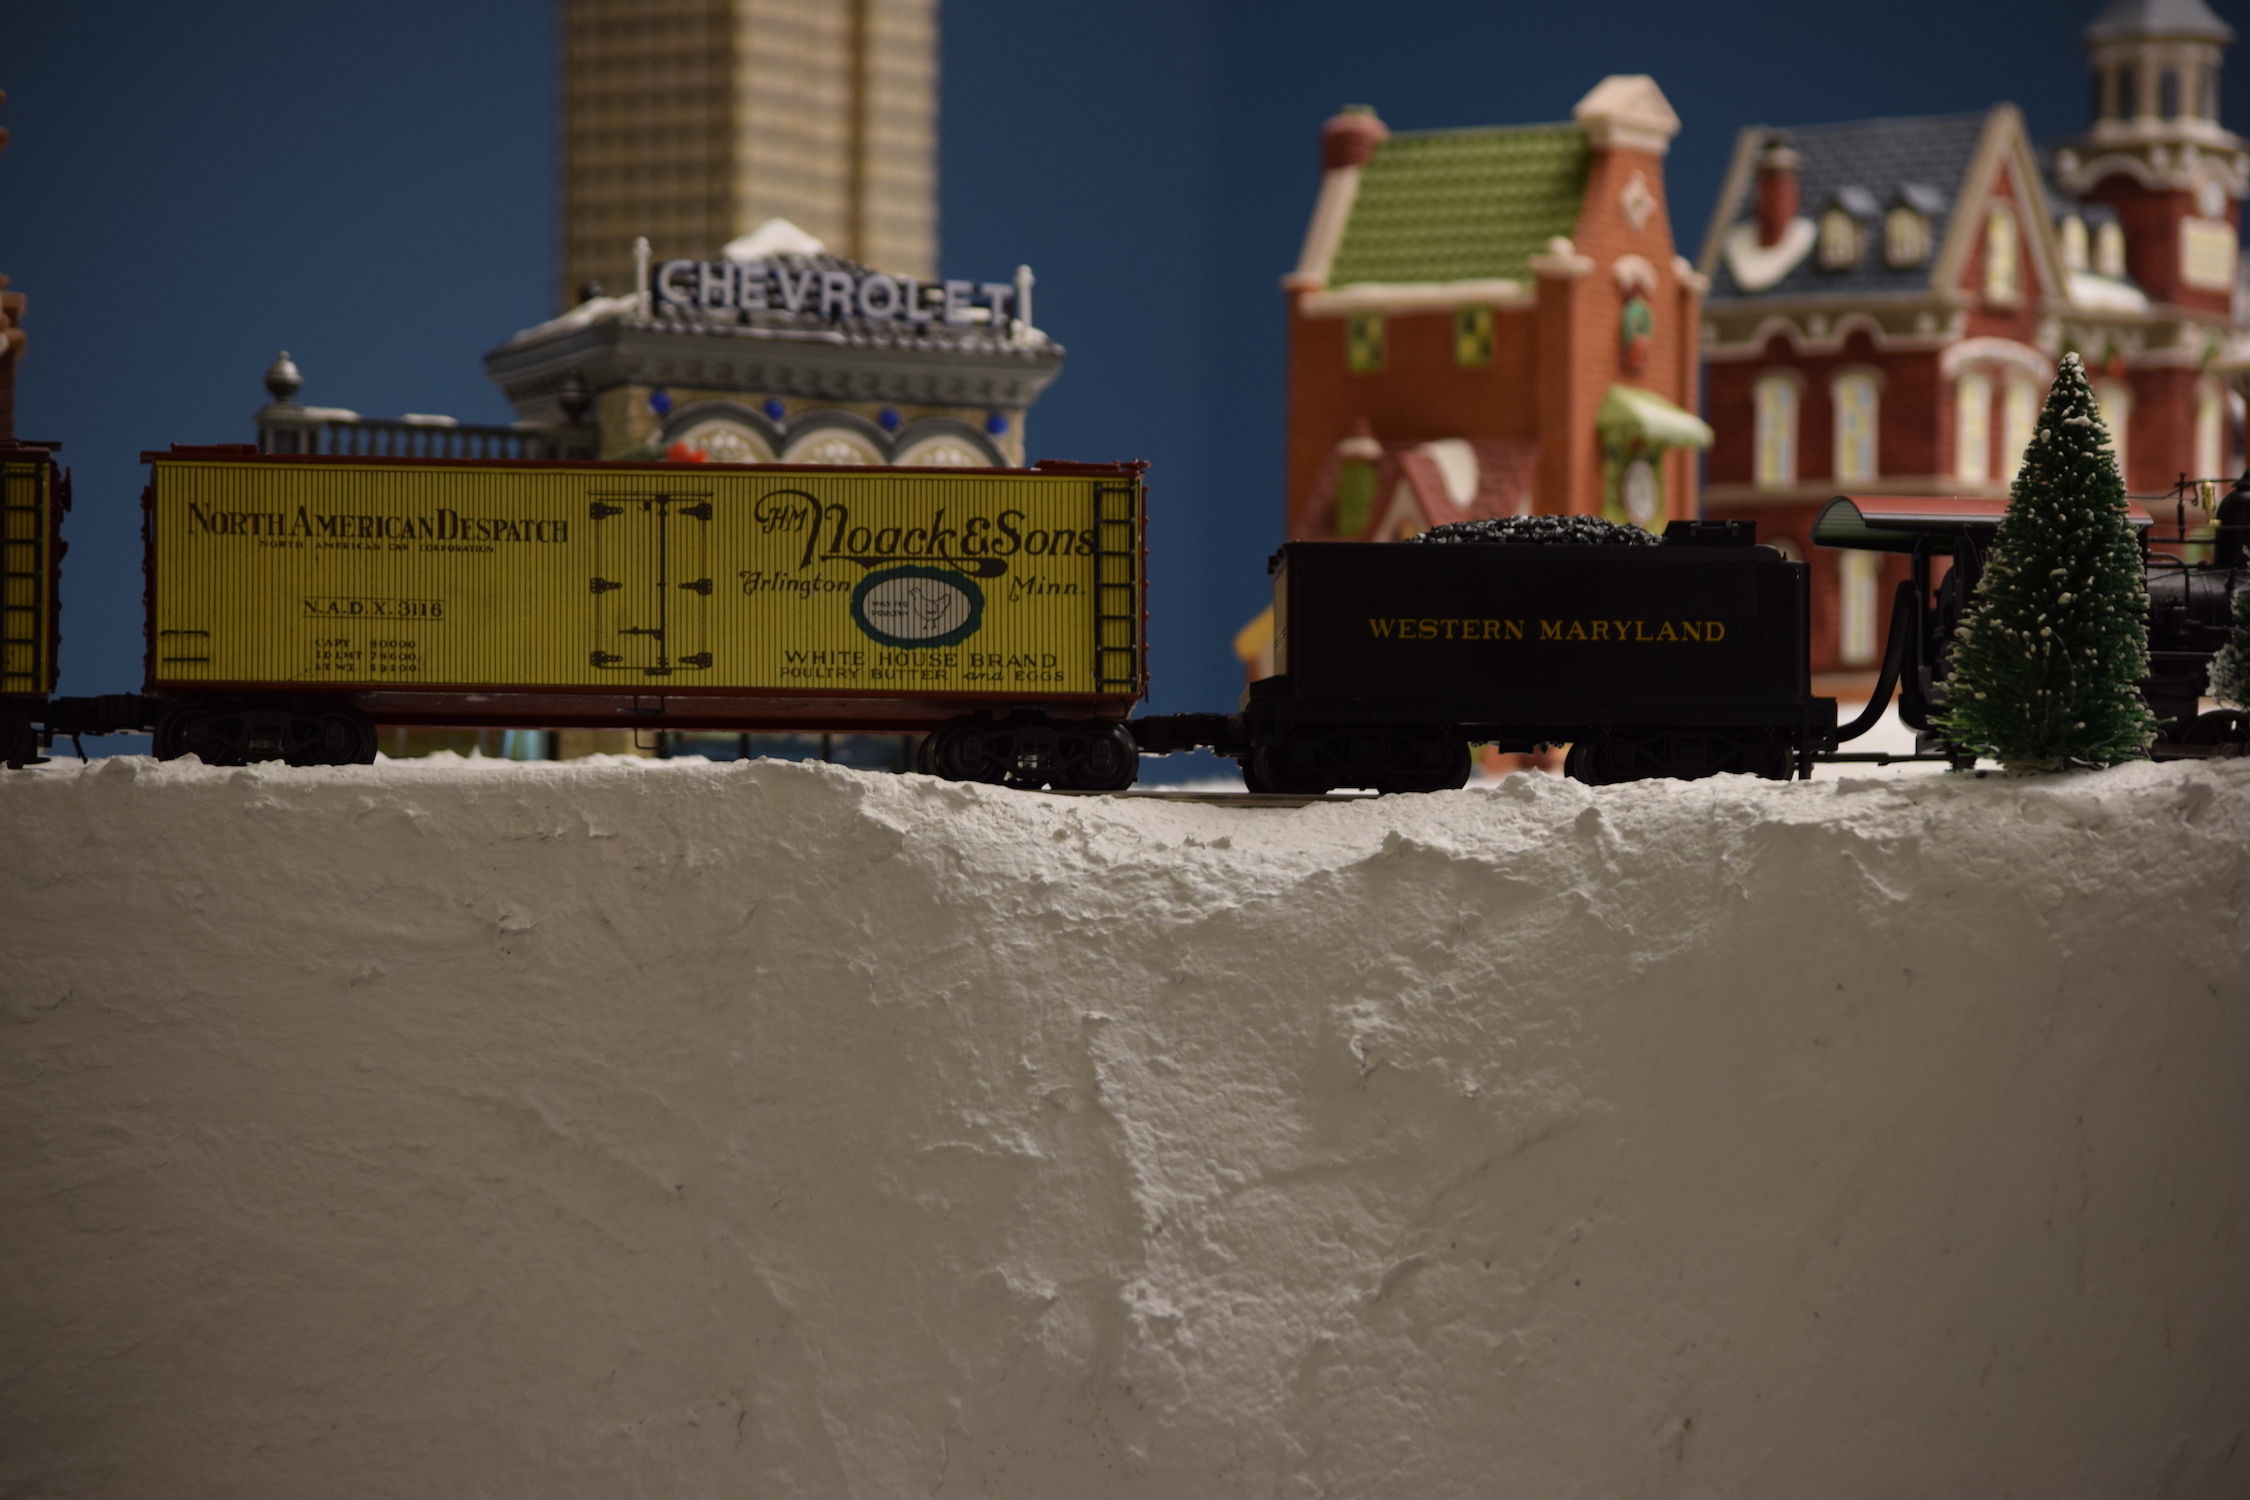 A mountain scene with a locomotive pulling freight cars on the mountain side - "Christmas at the Roundhouse" model train display.